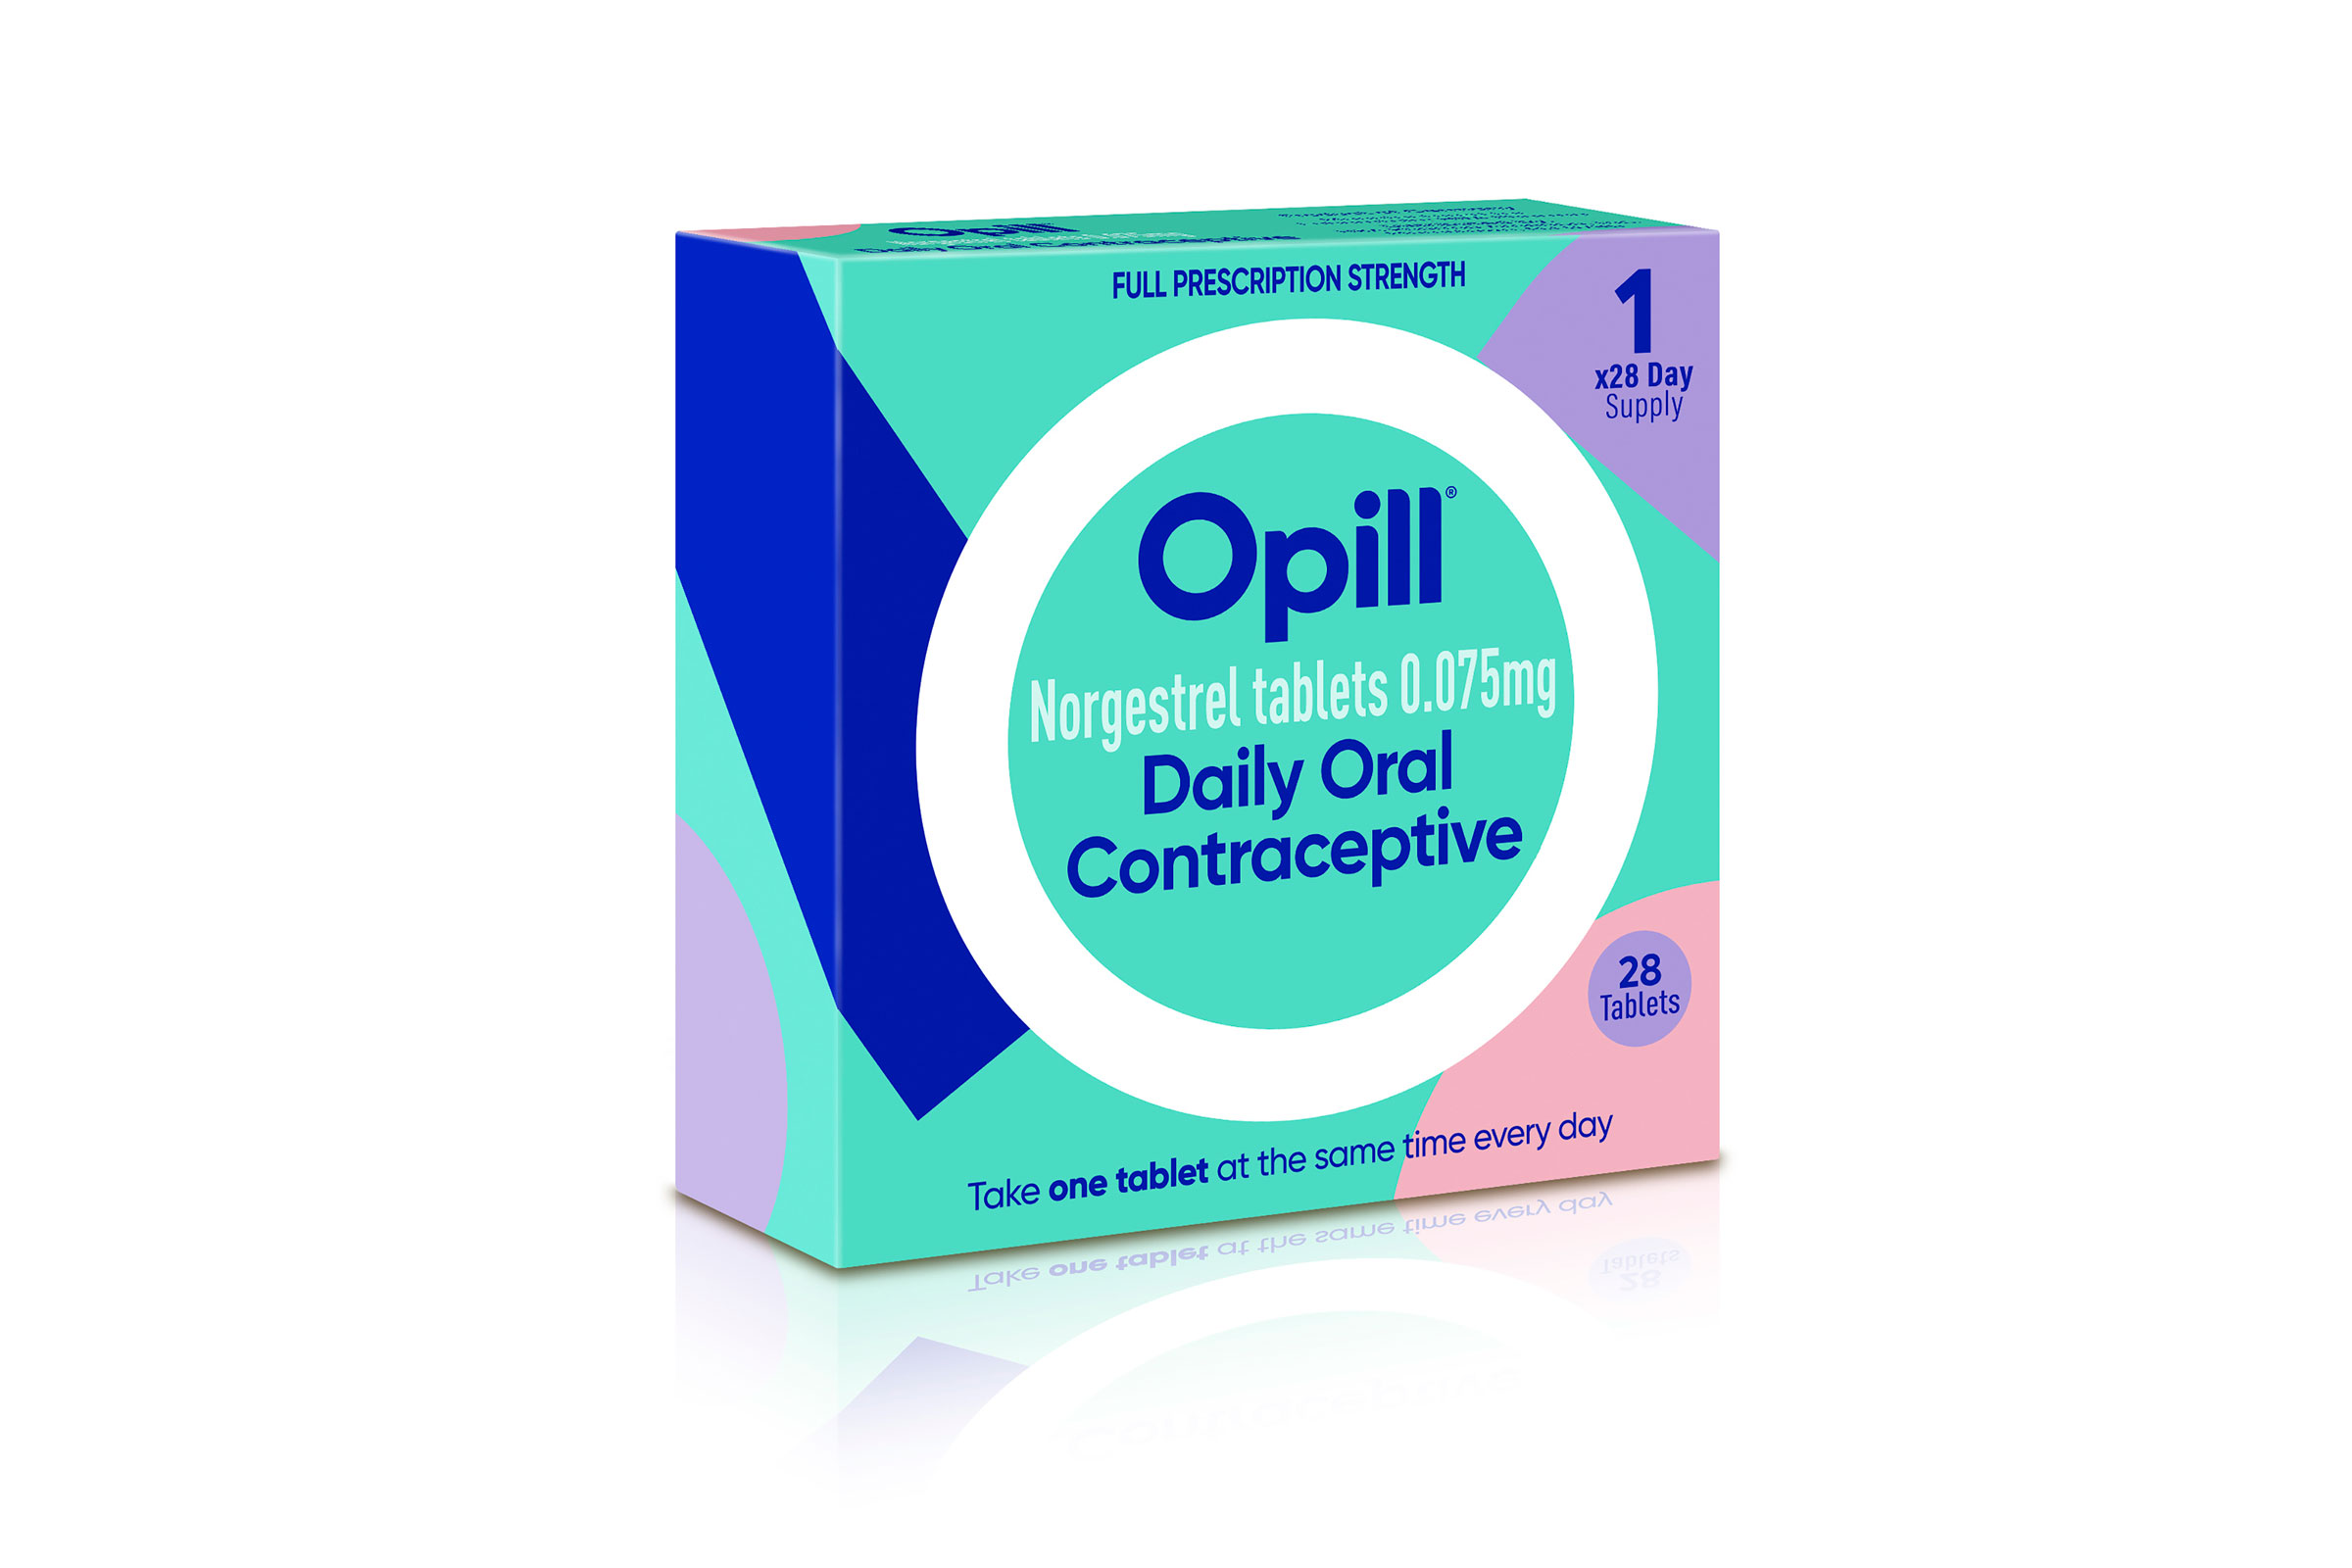 illustration depicting proposed packaging for the company's birth control medication Opill